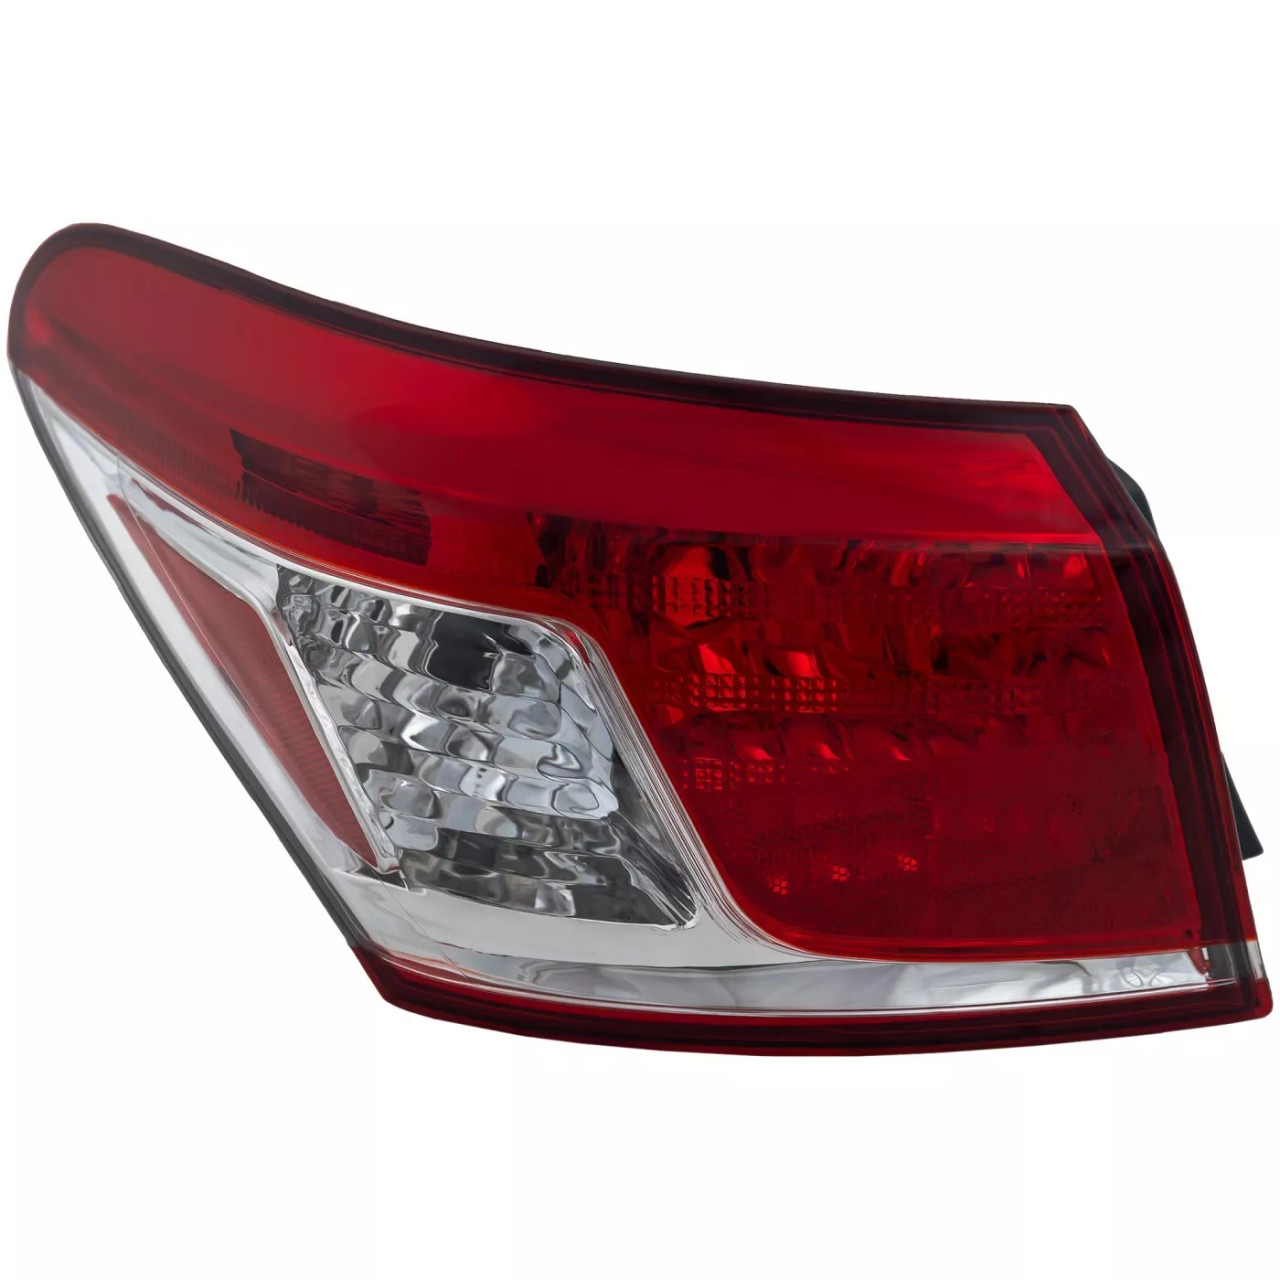 Set of 2 Tail Light For 2010-2012 Lexus ES350 LH & RH Clear & Red Lens